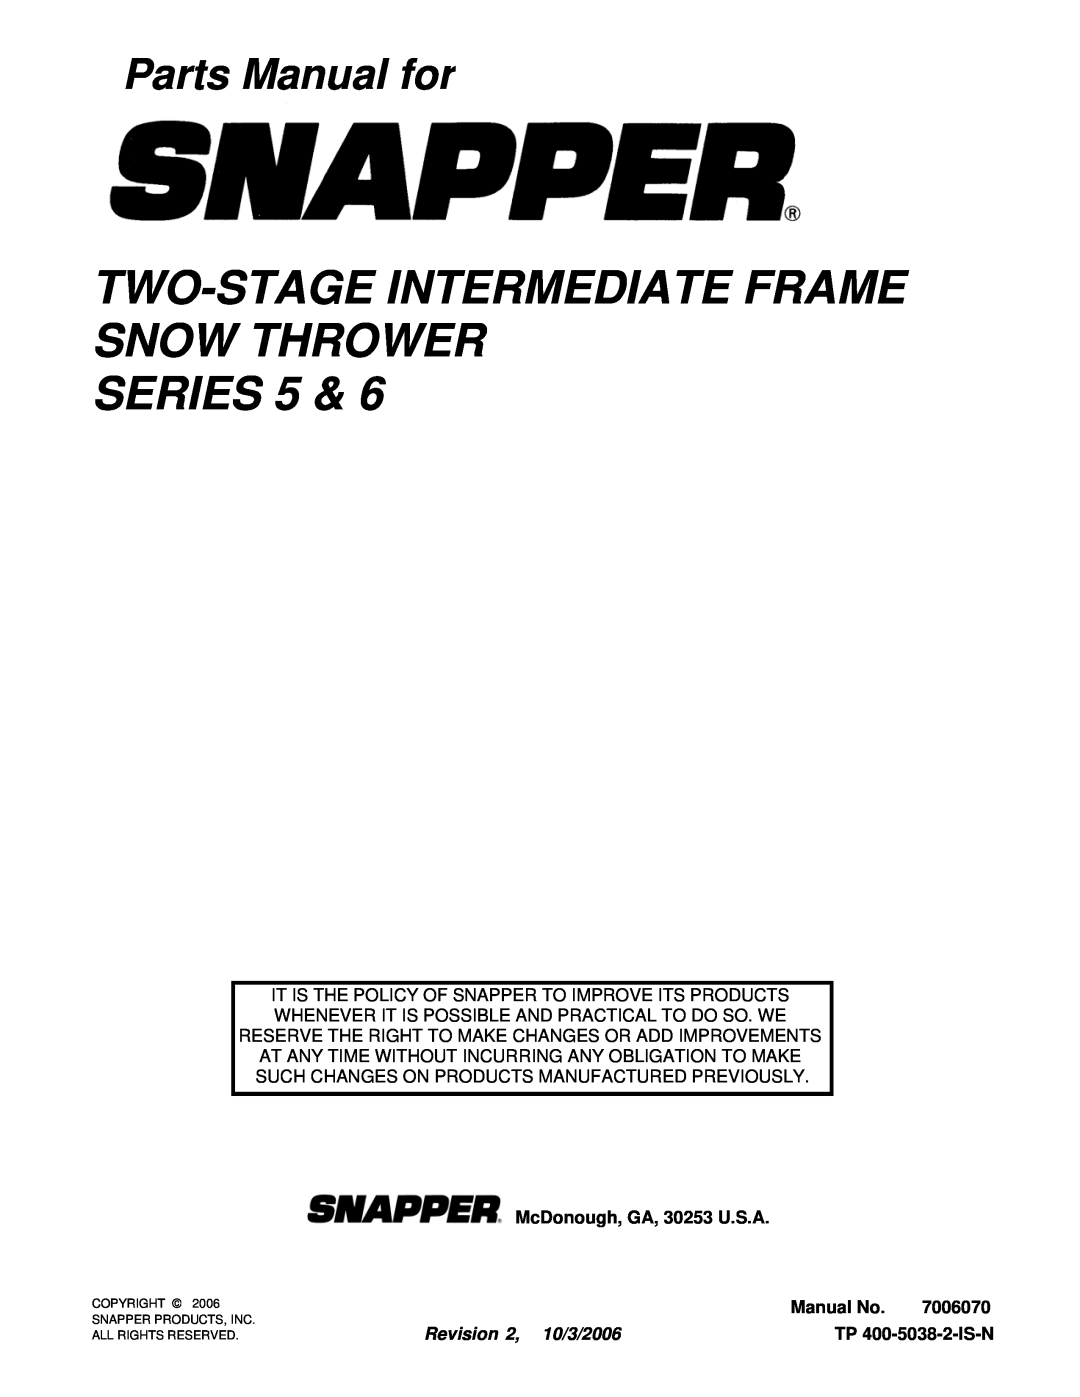 Snapper EI75225 Two-Stage Intermediate Frame Snow Thrower Series, Parts Manual for, McDonough, GA, 30253 U.S.A, Manual No 